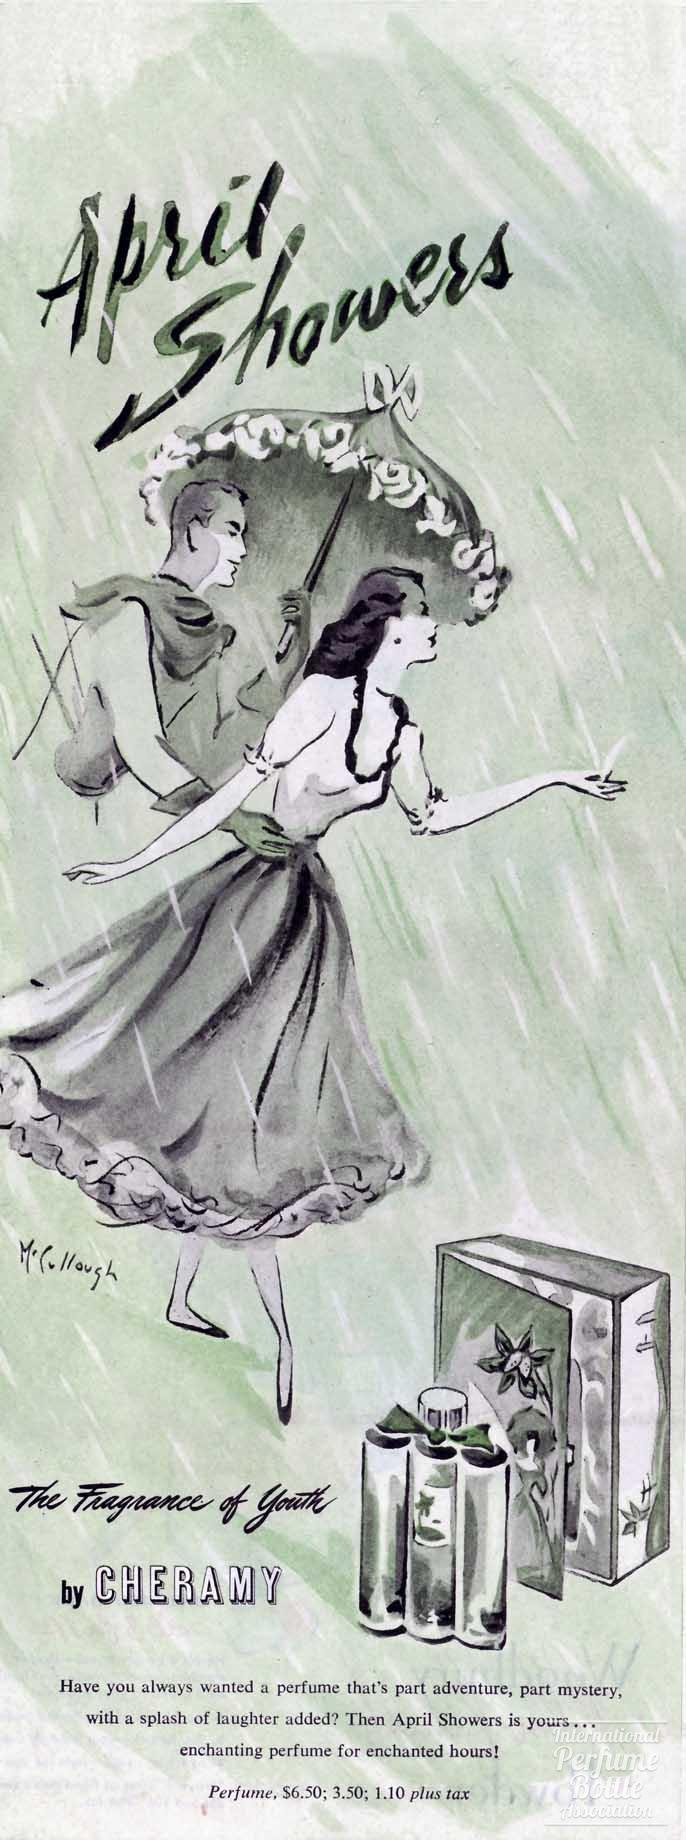 "April Showers" by Cheramy Advertisement - 1946